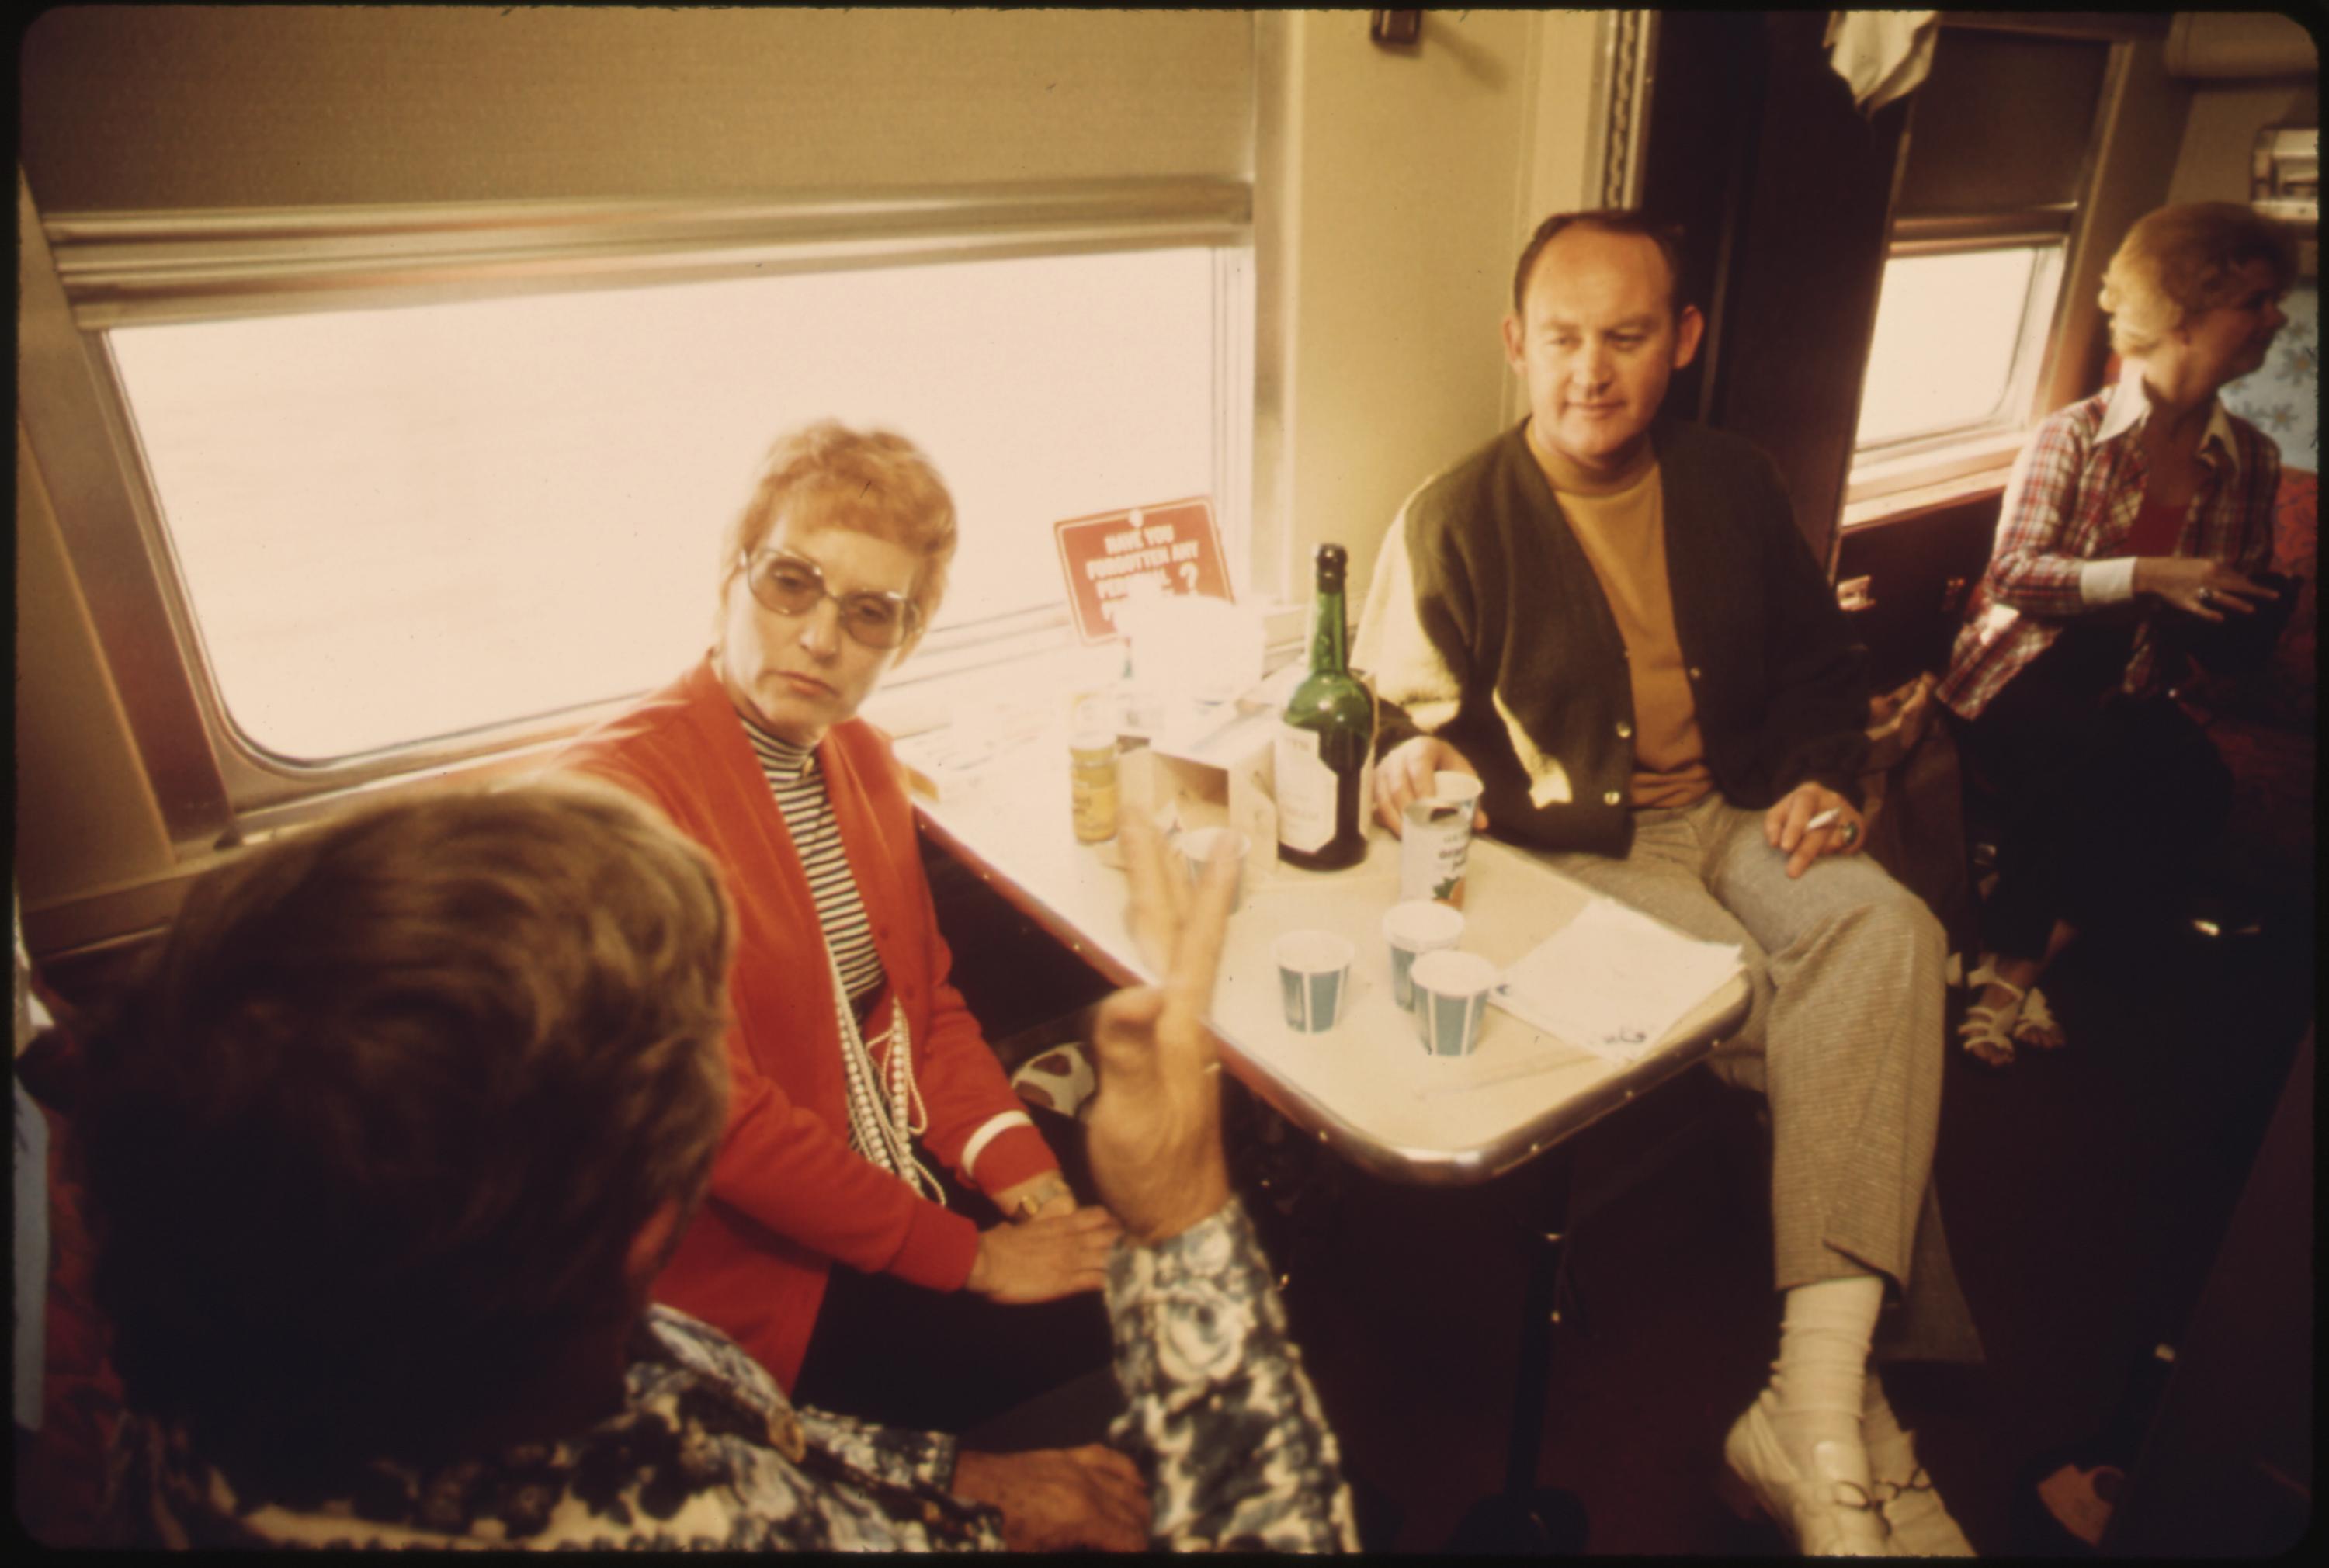 Passengers on the Southwest Limited between Los Angeles California, and Chicago are able to purchase tickets for private compartments as an extra cost option on their travels, June 1974